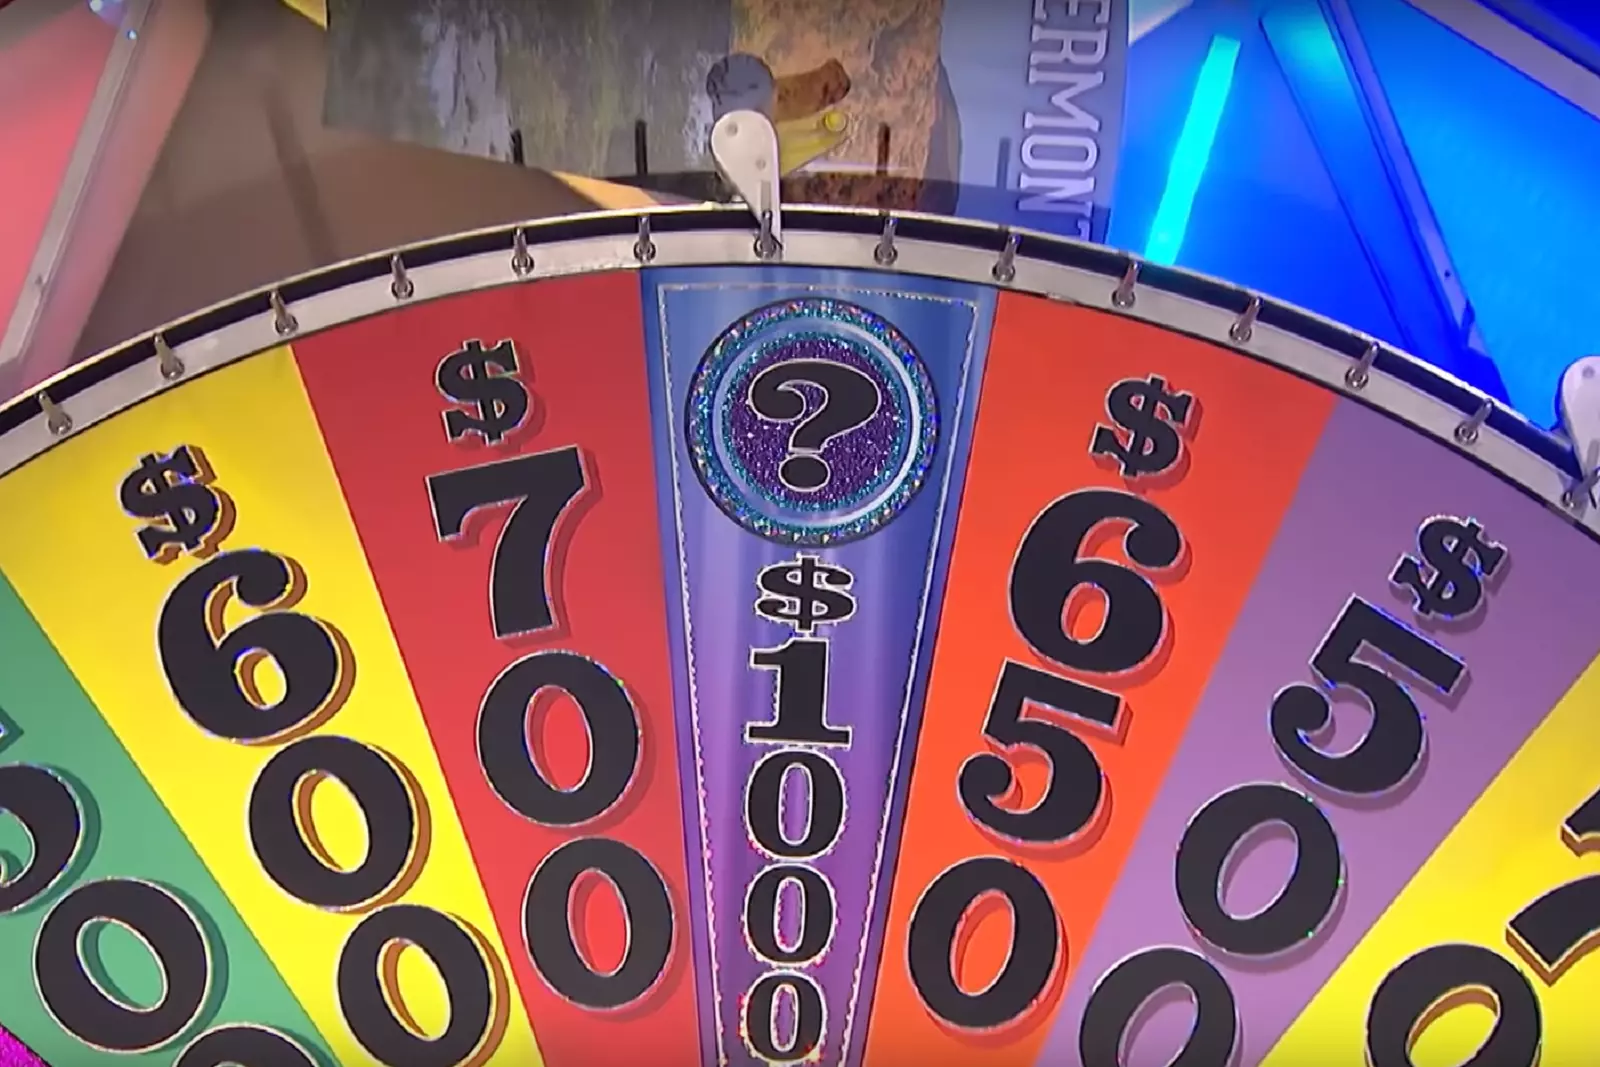 Janesville Teacher Learns Life Lesson After Wheel Of Fortune Win1600 x 1067